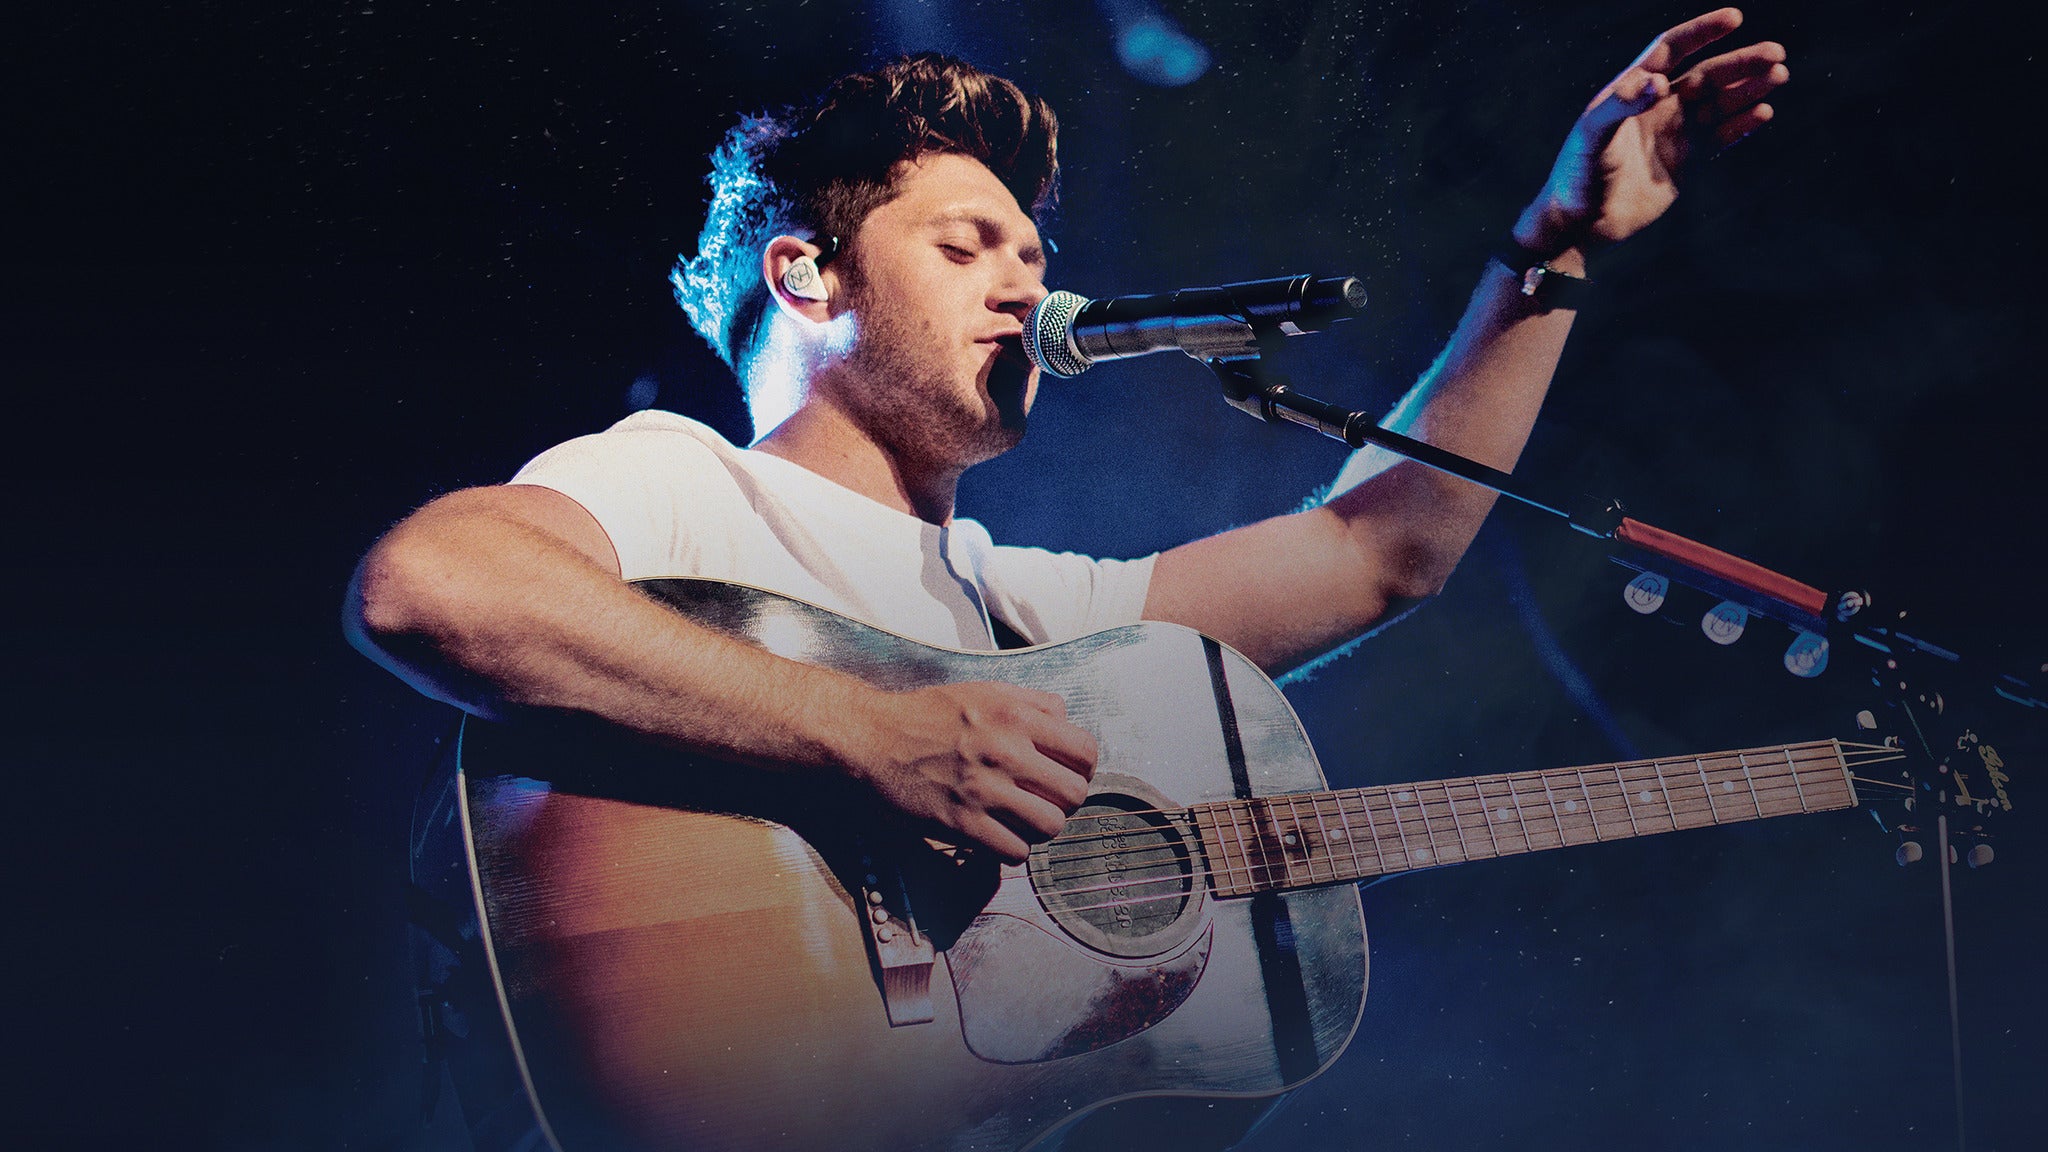 Honda Civic Tour presents Niall Horan, Nice To Meet Ya in Milwaukee  promo photo for Official Platinum presale offer code